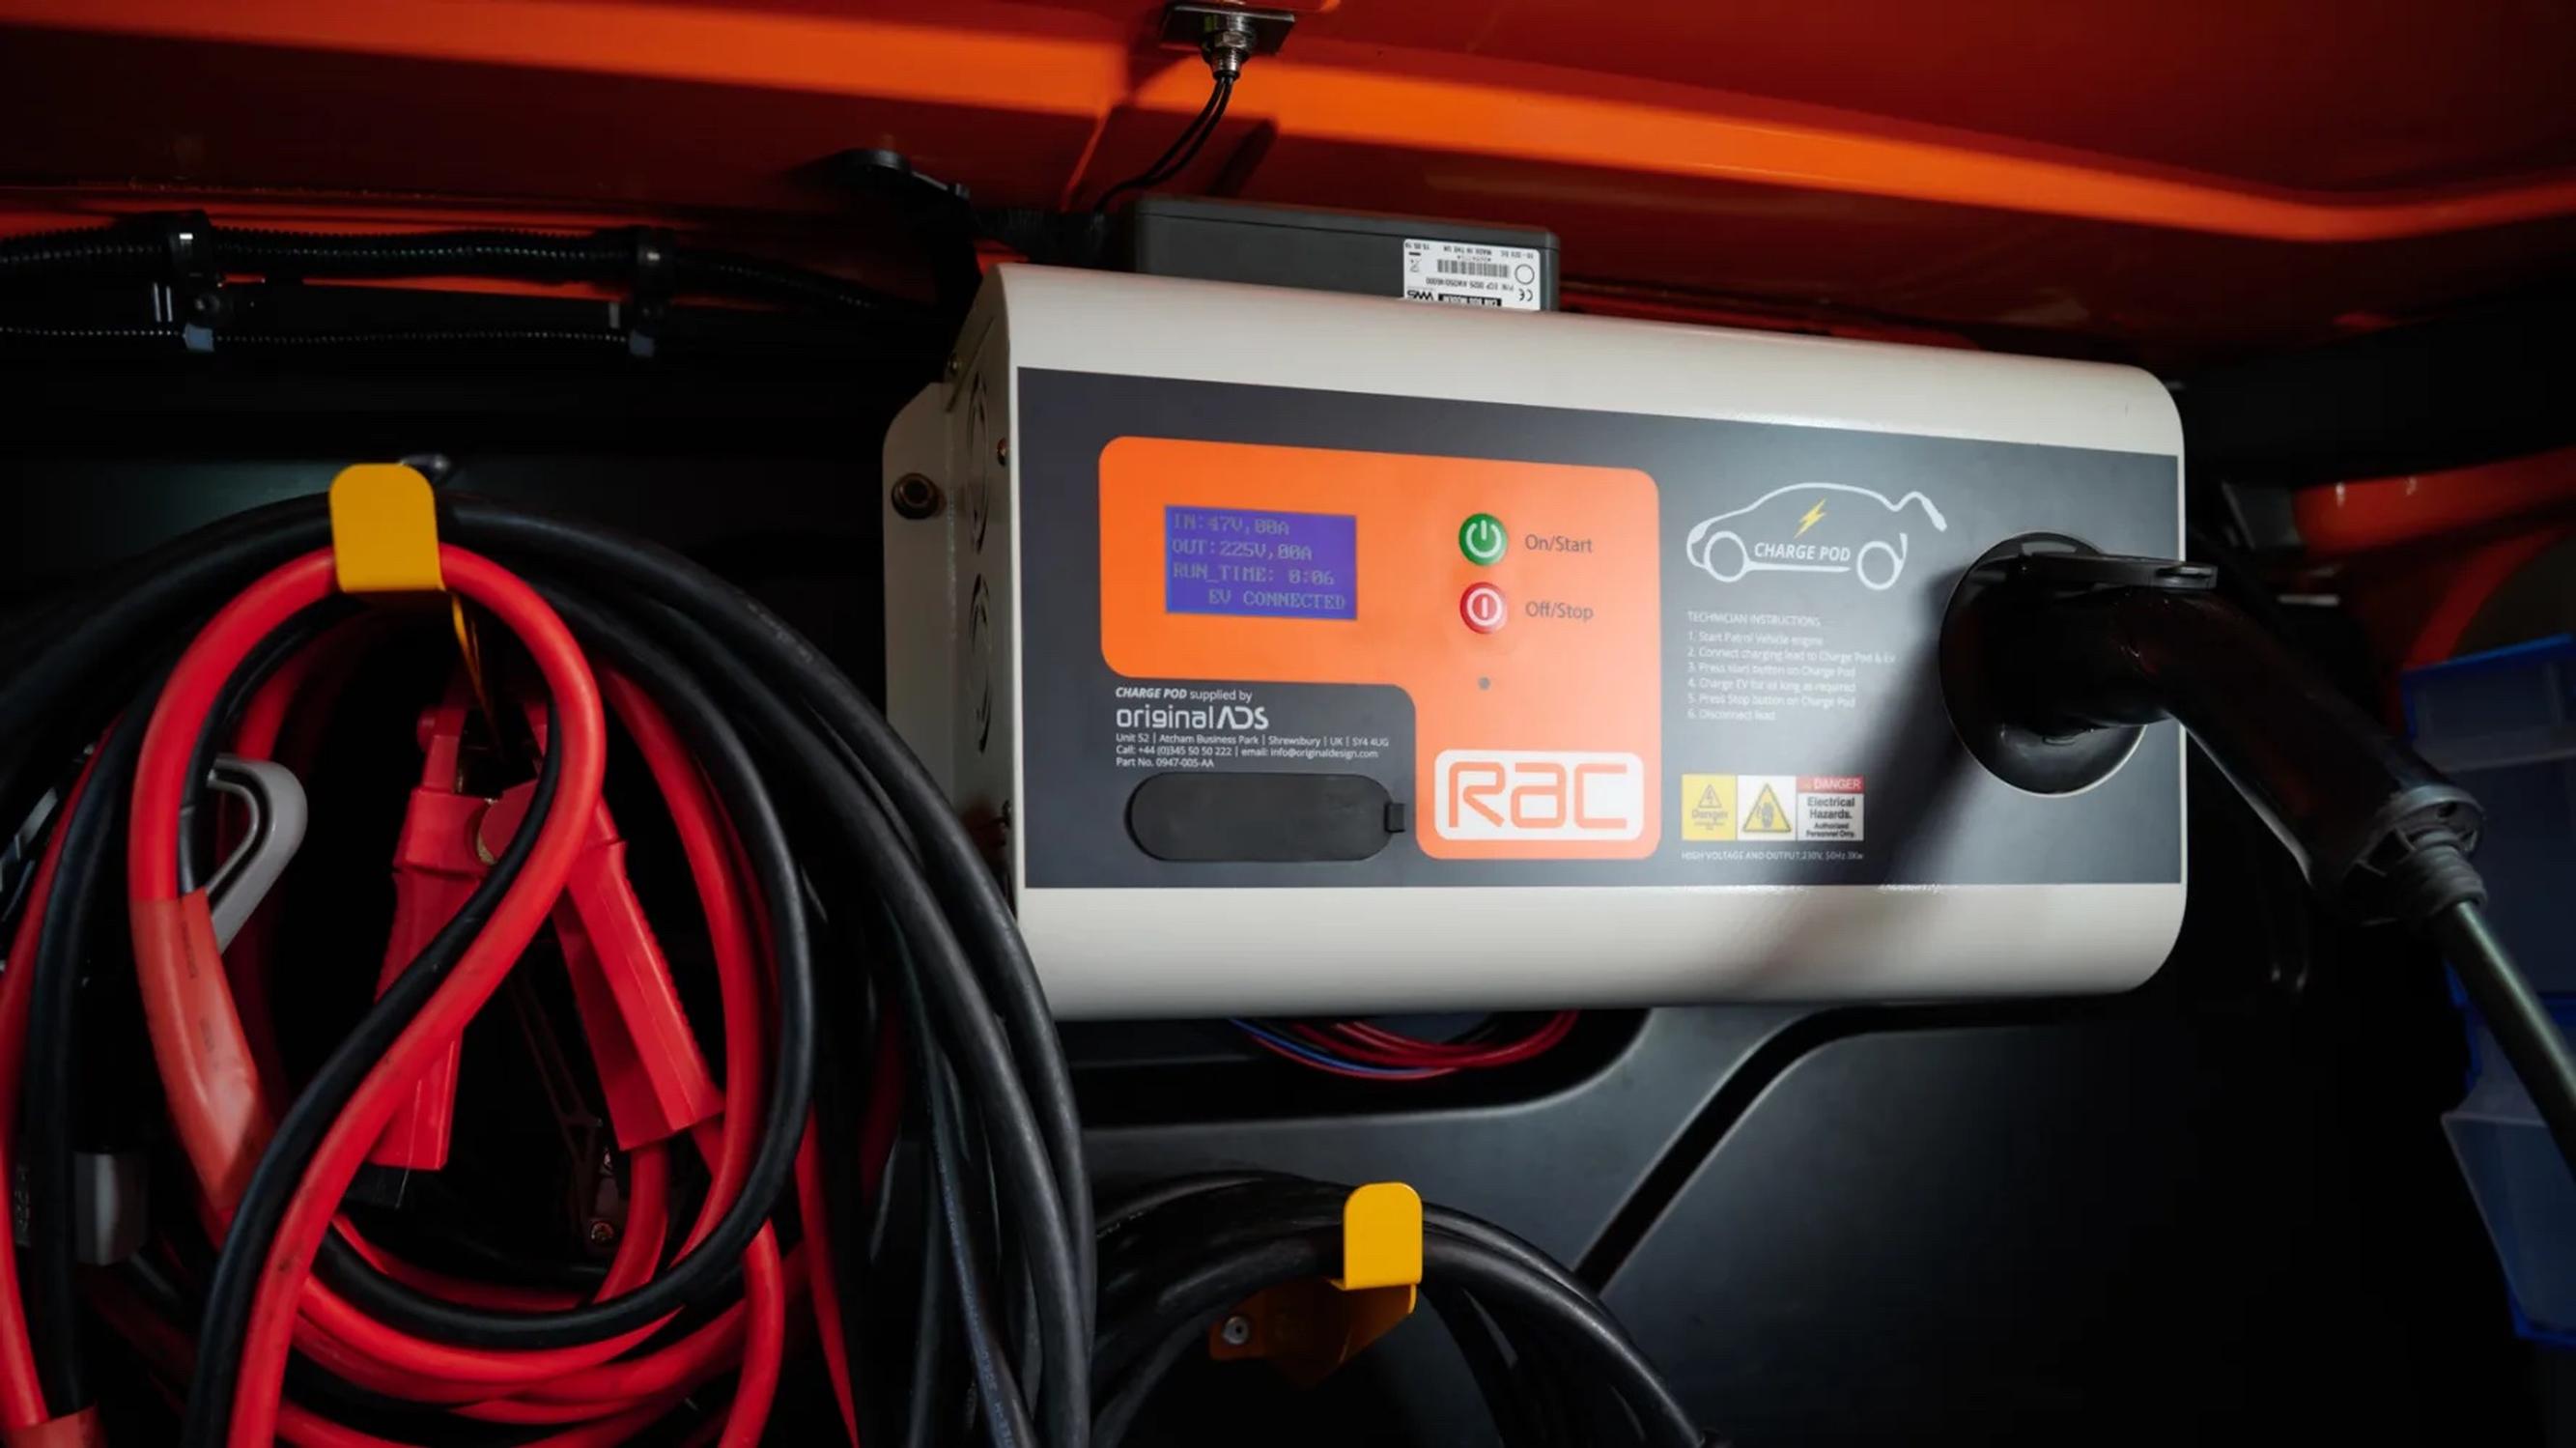 RAC rolls out faster emergency EV chargers to patrol vans